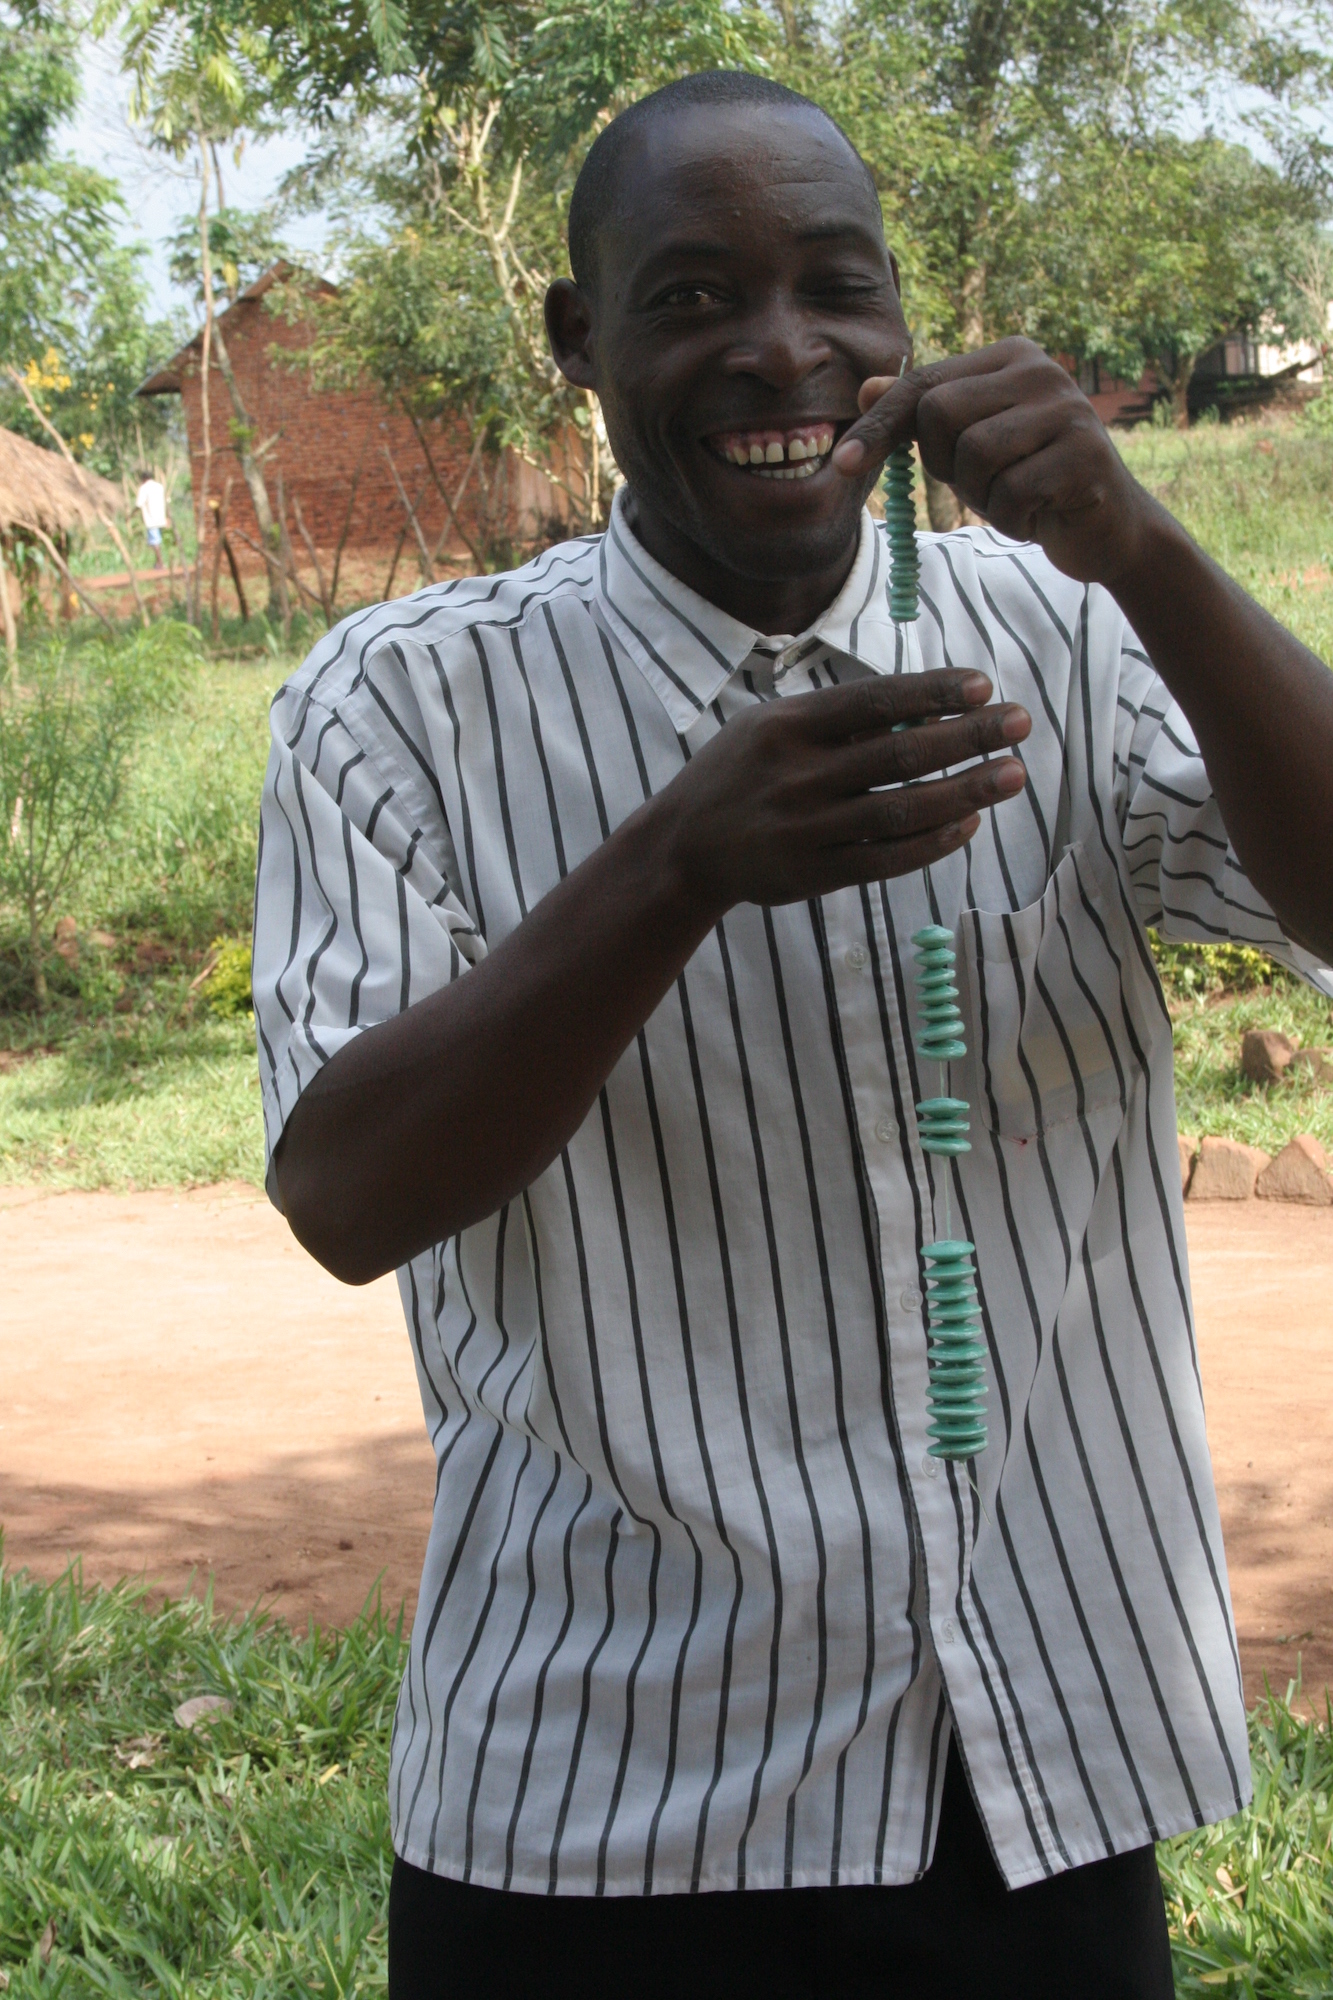 Smiling man holding a strand of beads